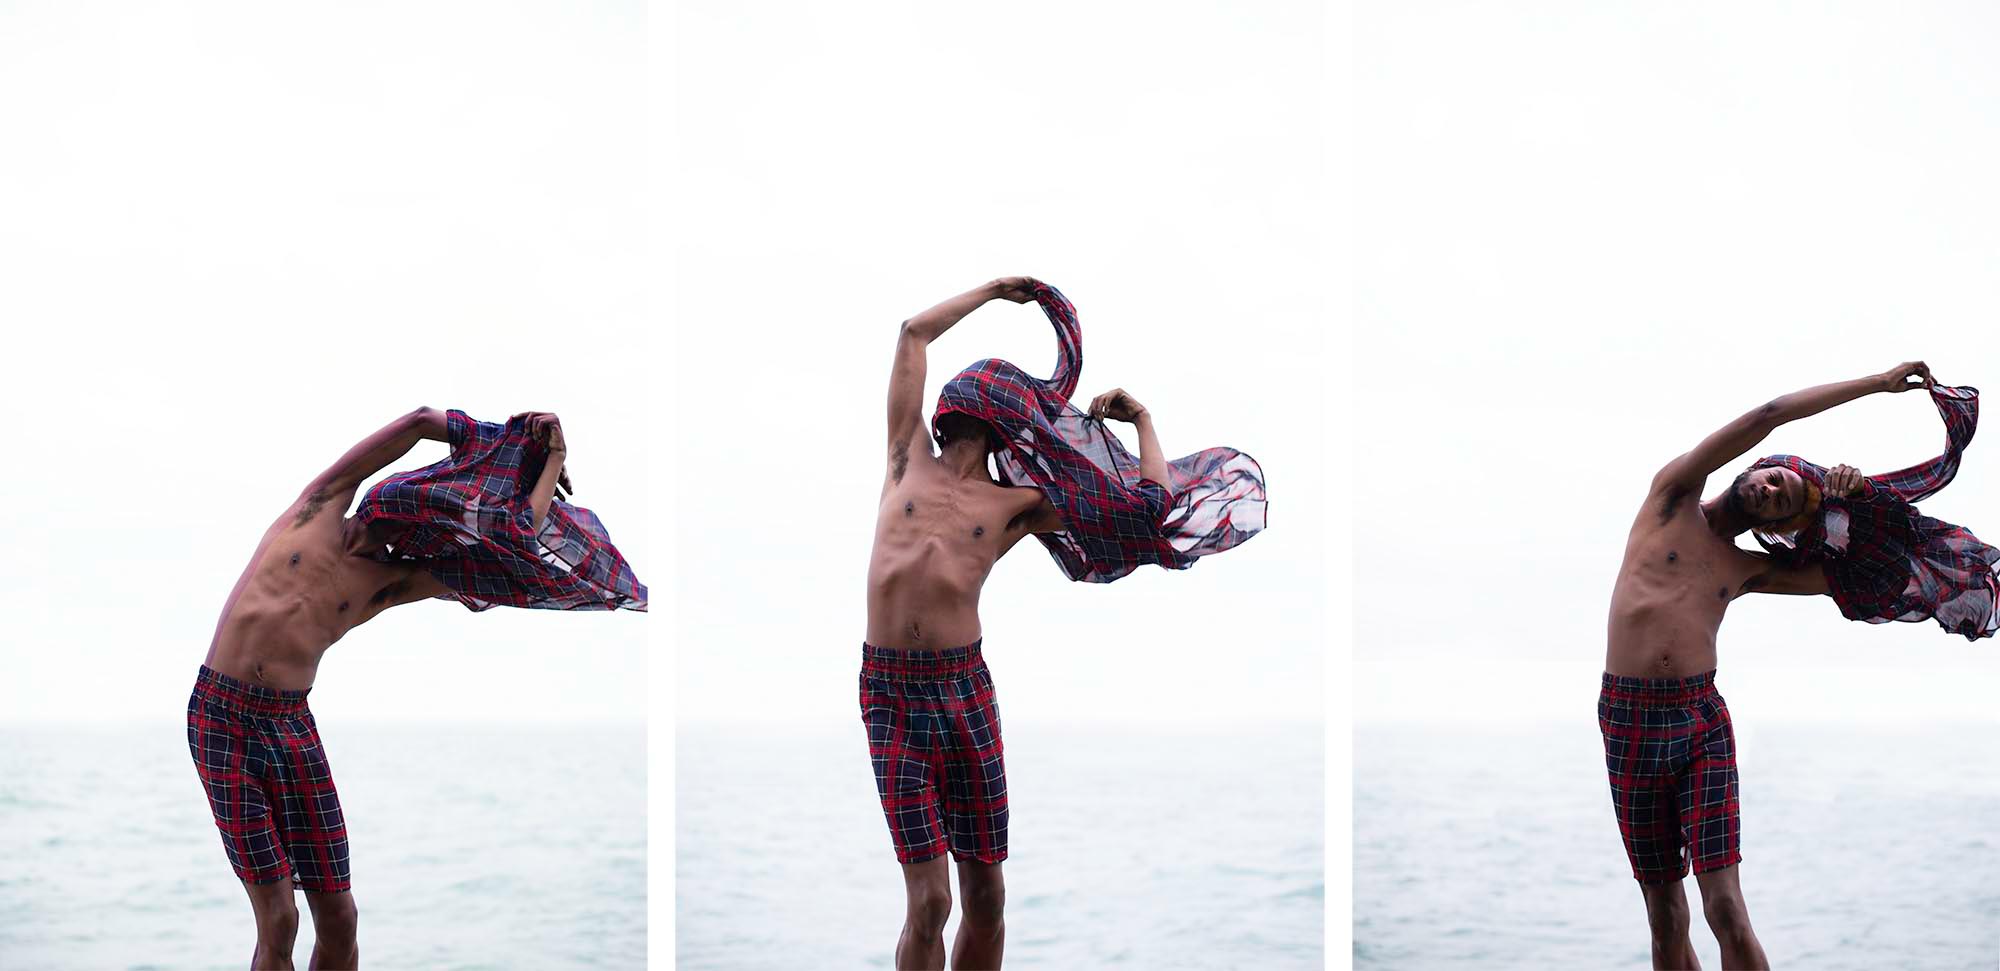 Image: A triptych of Wallace standing in front of a body of water, taking of a sheer plaid shirt. Each image shows Wallace with the shirt over his head, in different postures, and points of disrobing as the shirt waves in the wind. Photo by Chelsea Ross